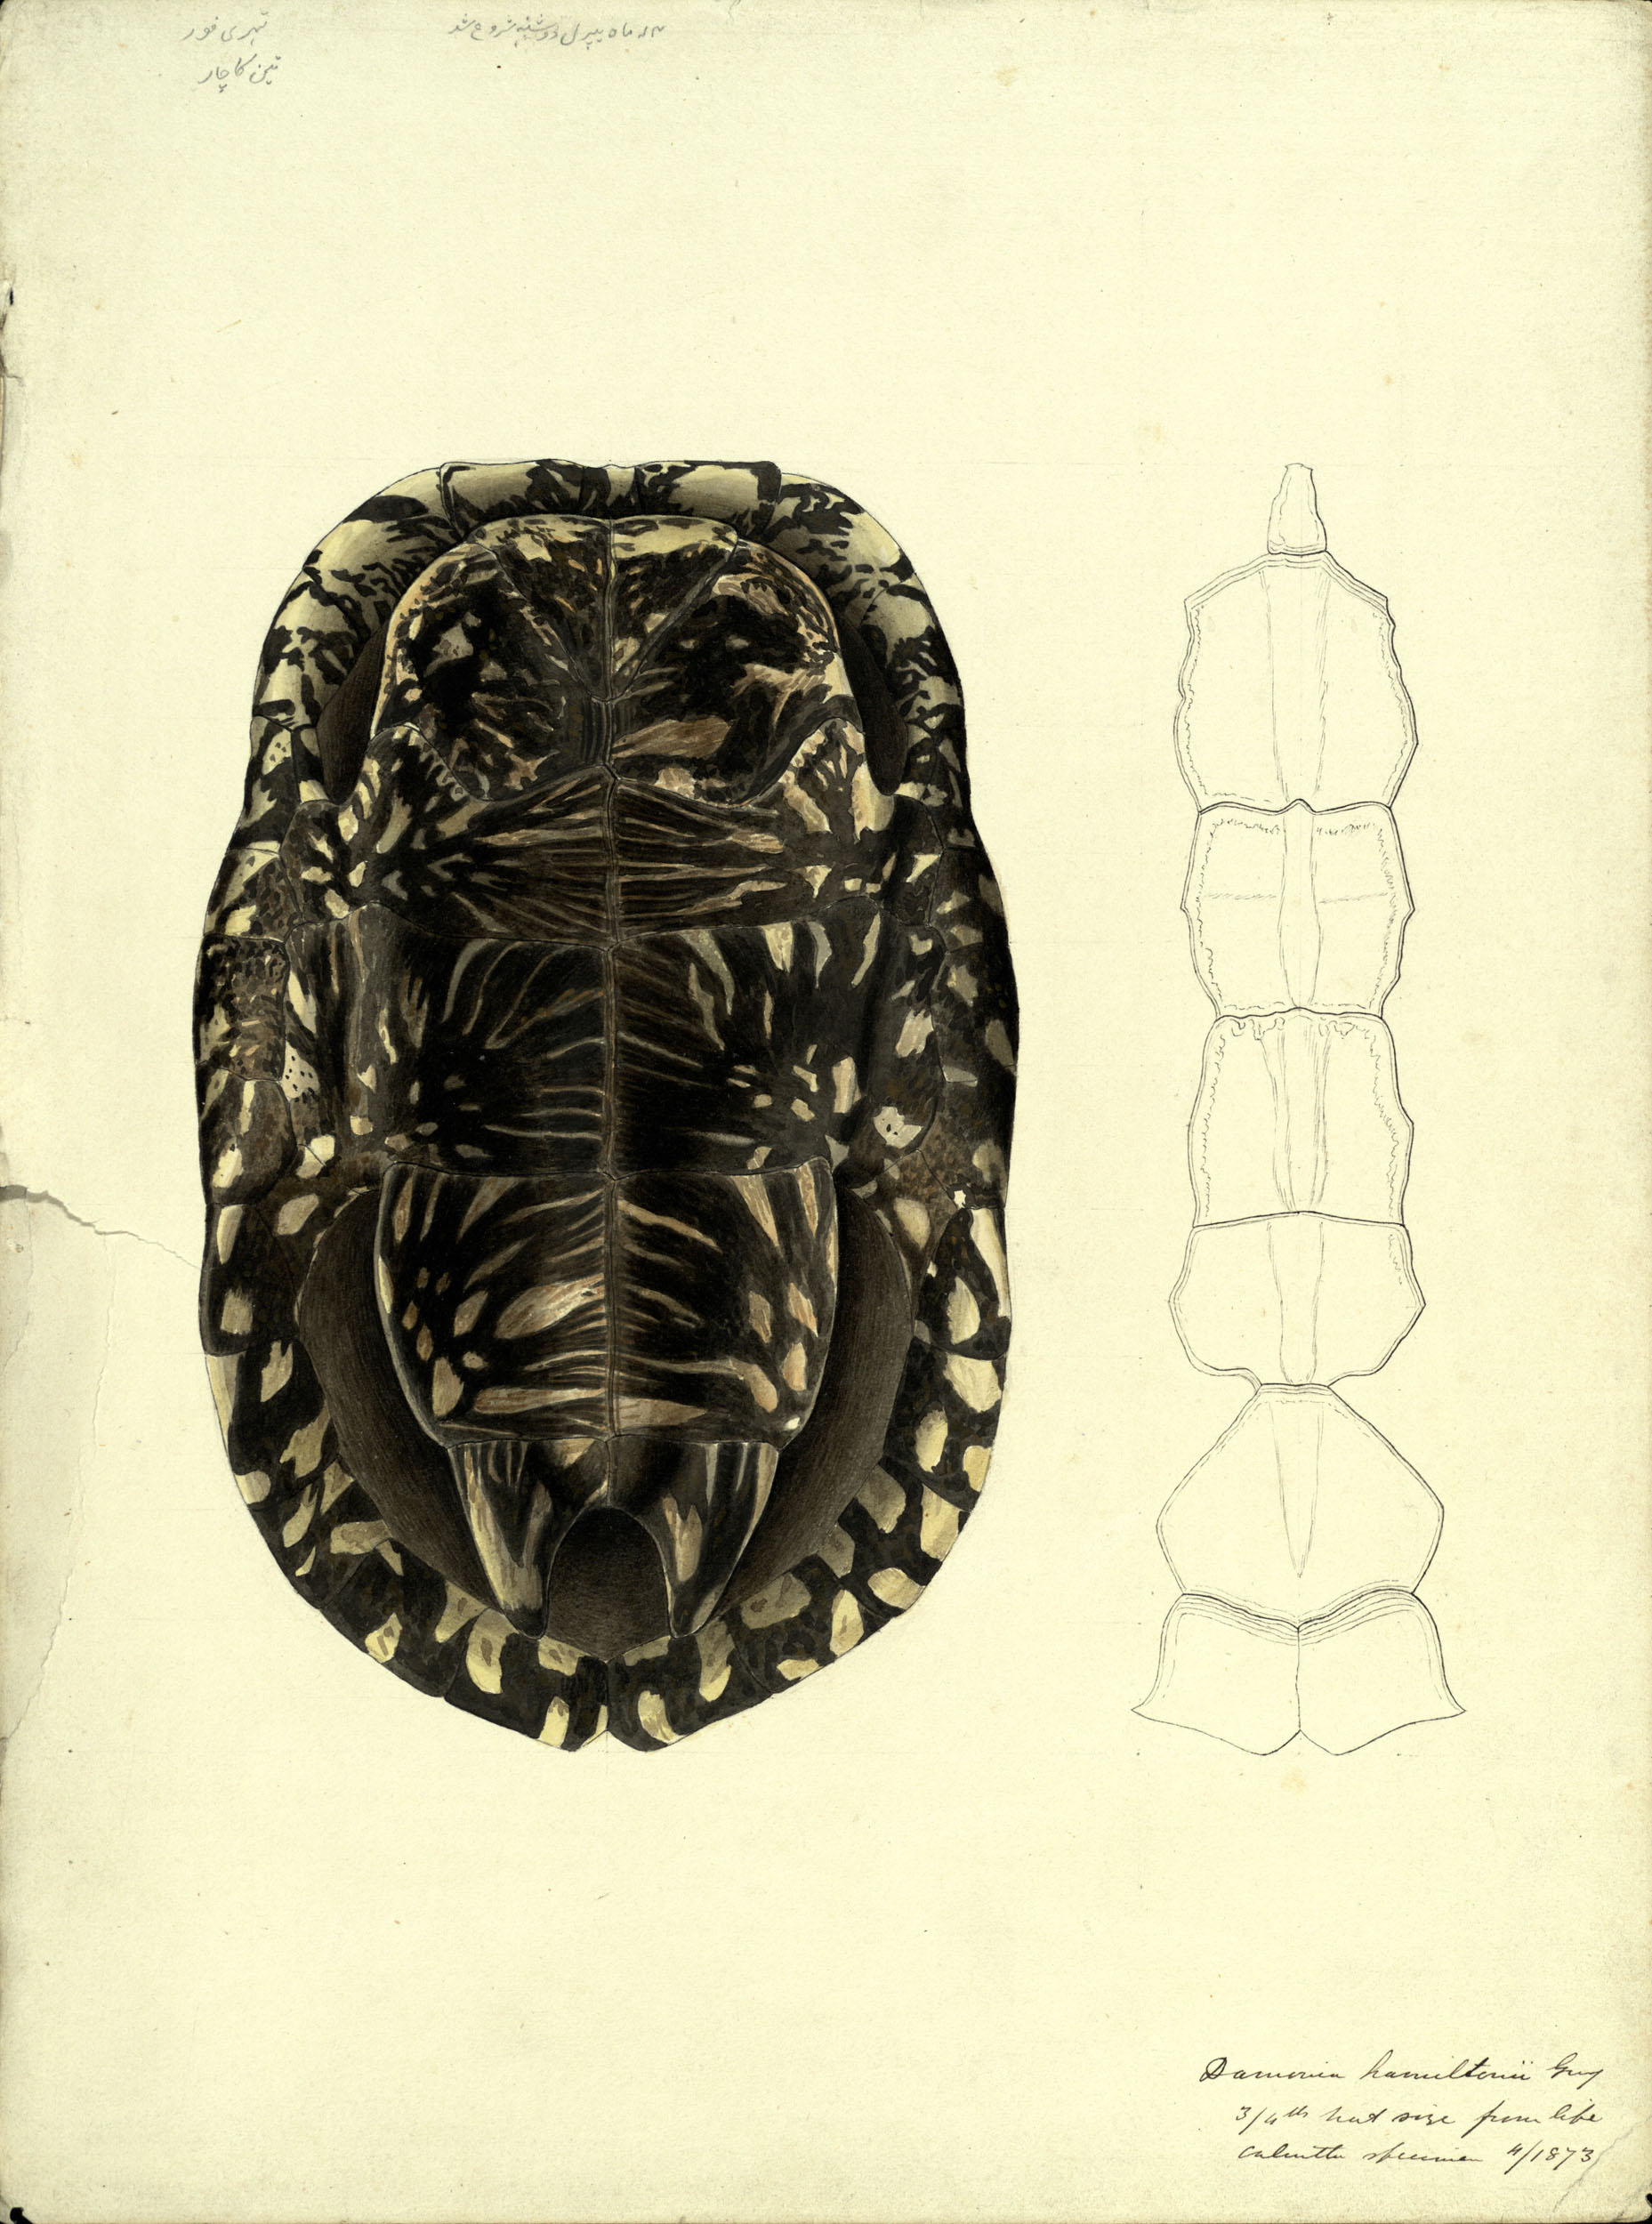 A hand-painted illustration and pencil diagram of a black pond turtle shell, 1873, by Scottish naturalist John Anderson (St Andrews manuscript ms30413)